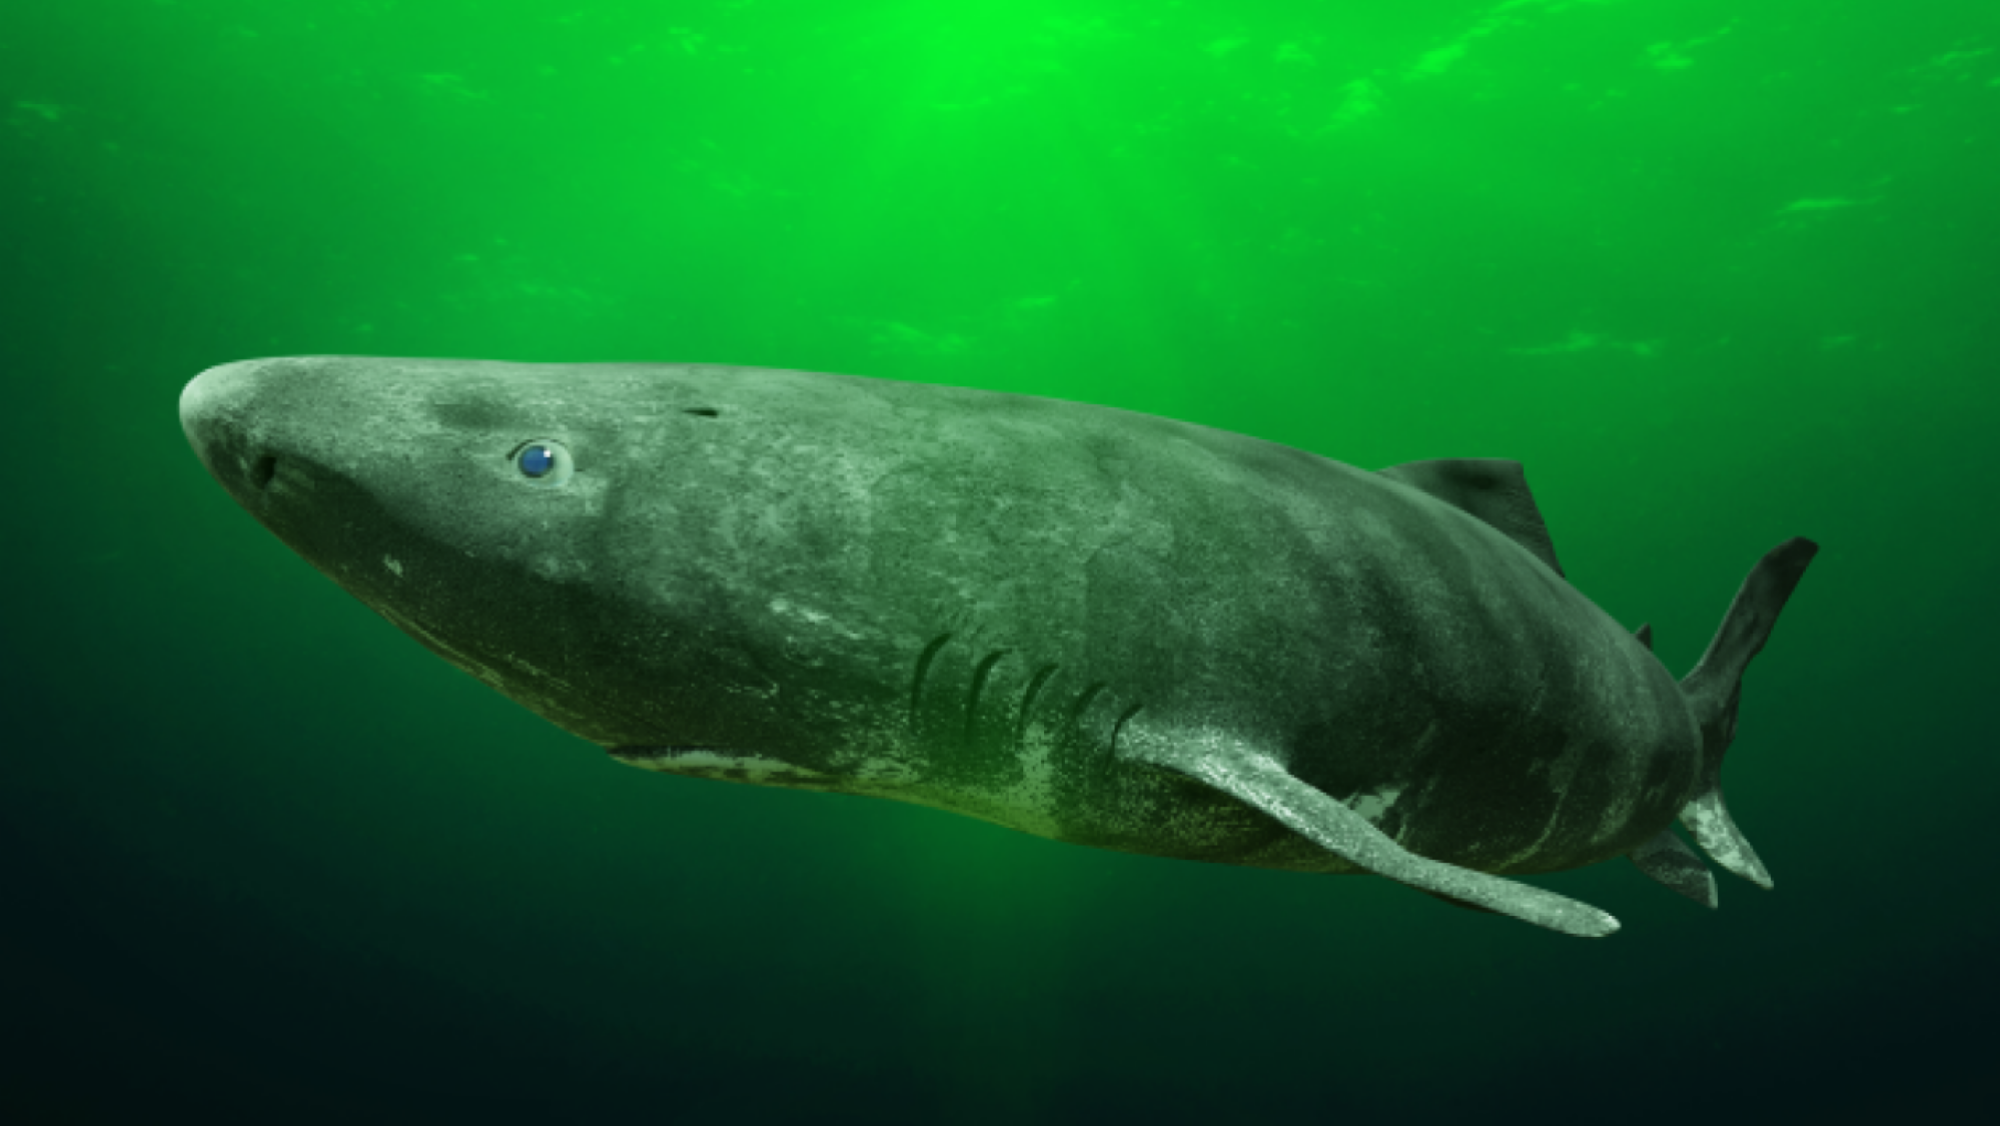 A Greenland shark swimming in the ocean.